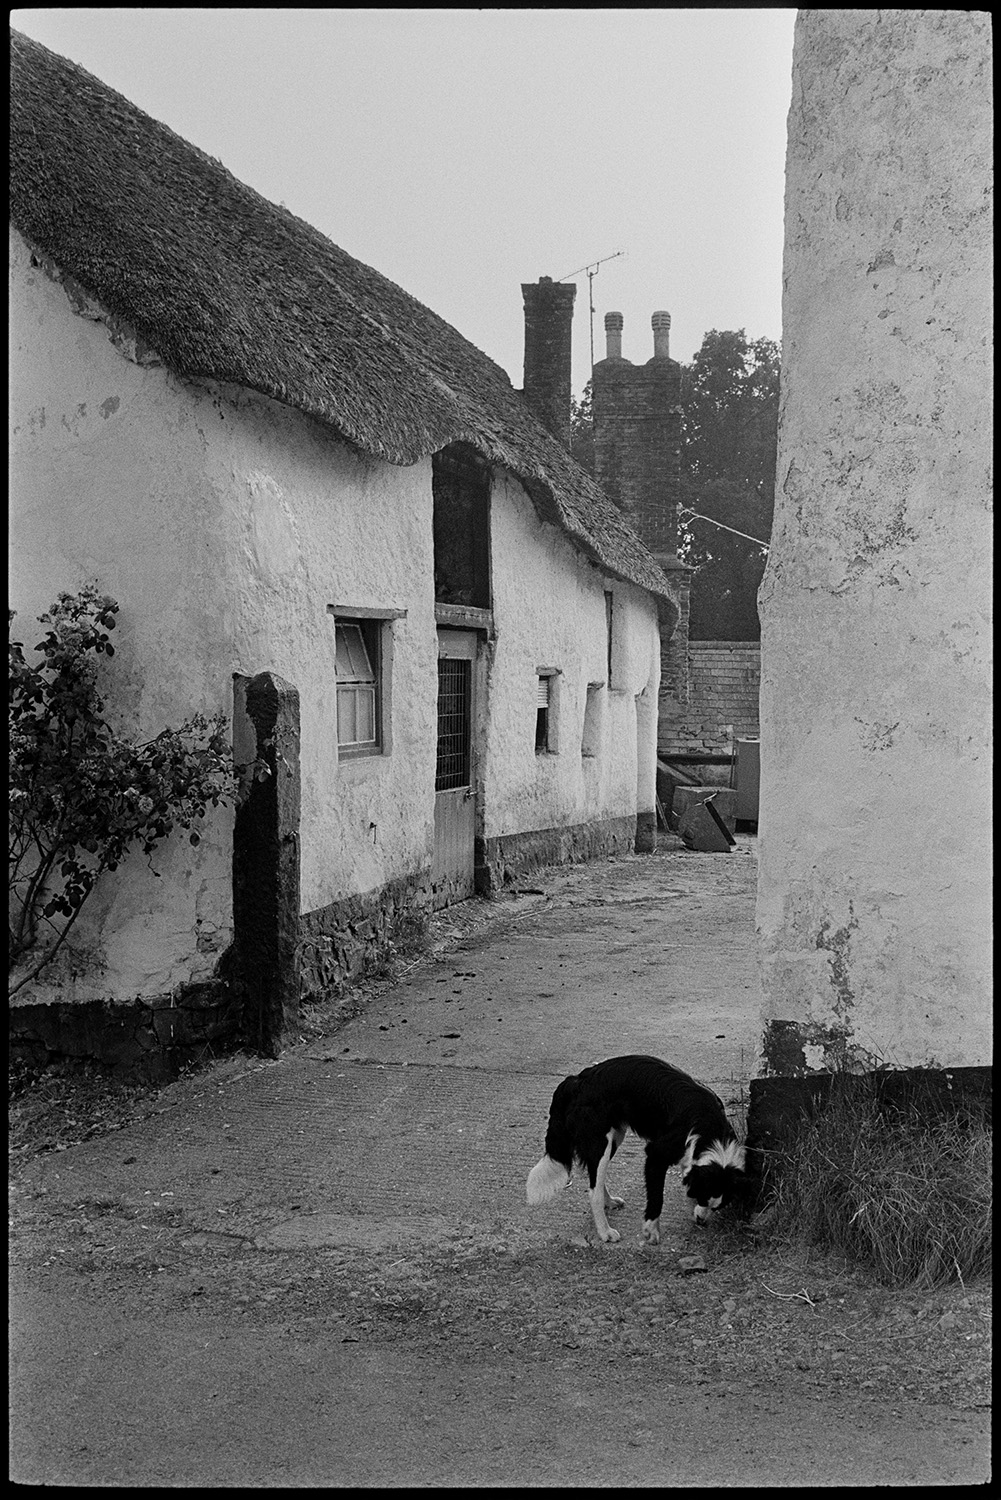 Cob and thatch barn and farmhouse beside road. 
[A dog stood at the entrance to a cob and thatch farmhouse at Mousehole, Iddesleigh. Chimneys from other buildings can be seen in the background.]